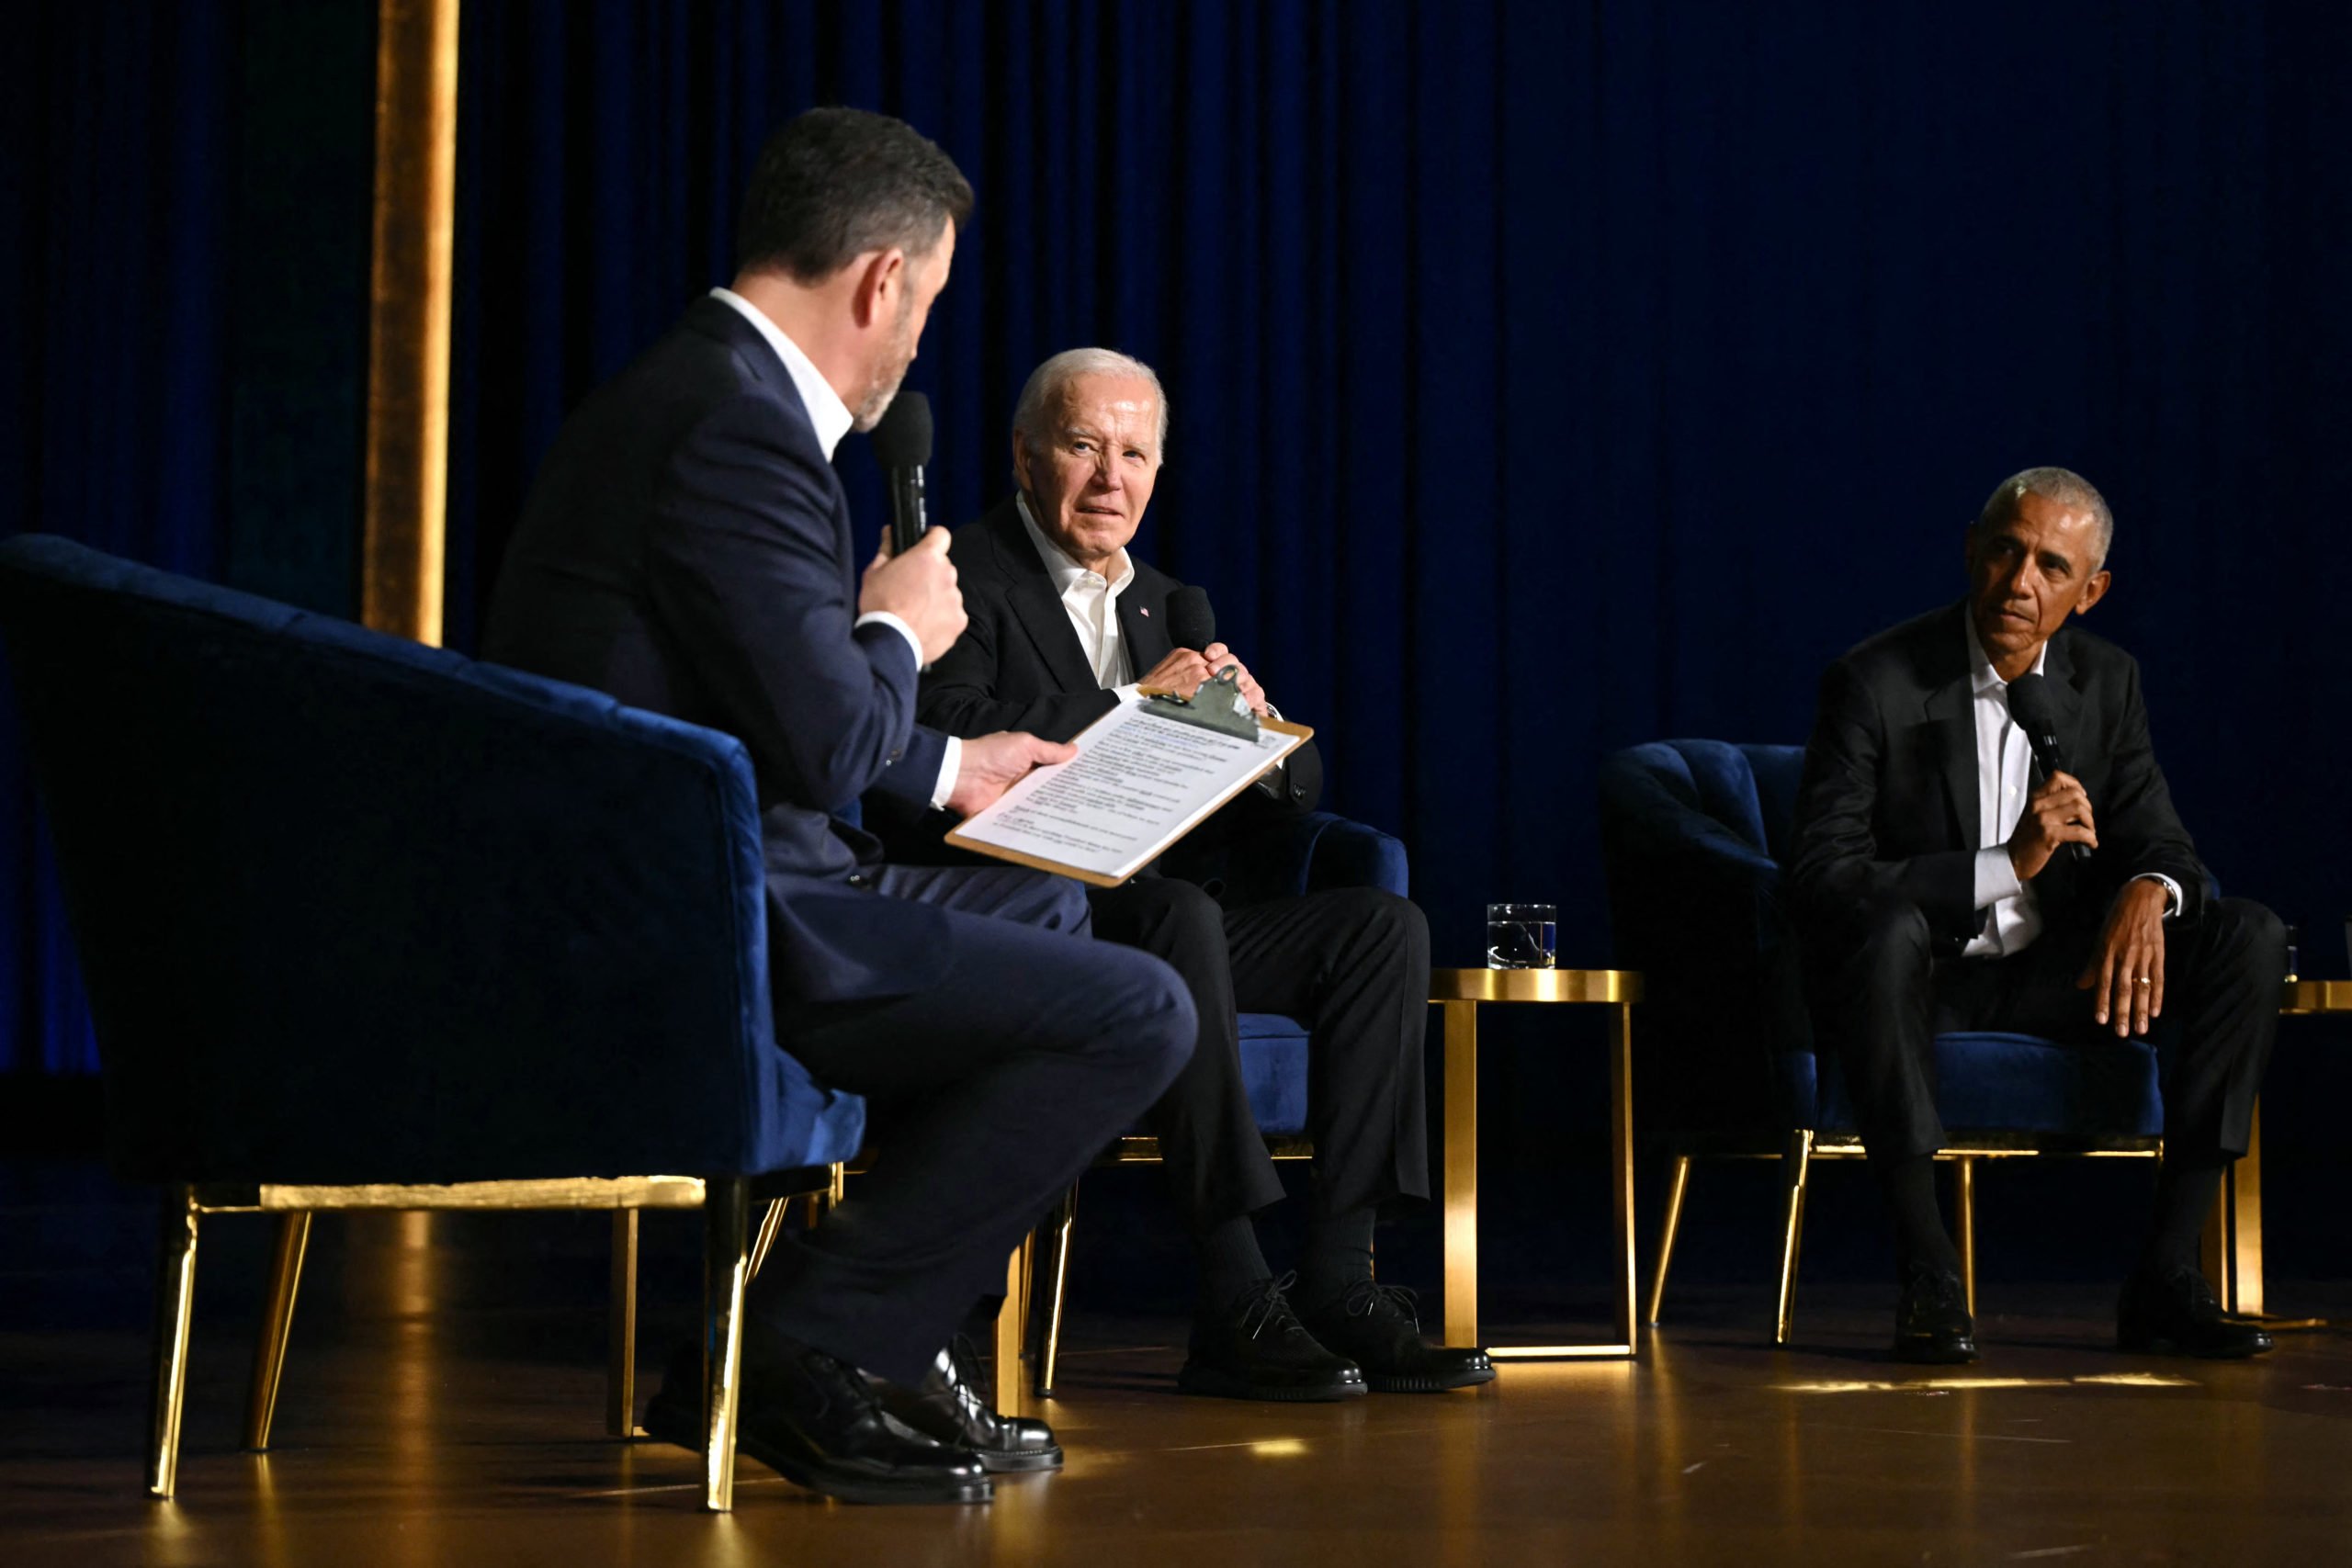 US President Joe Biden (C), US television host Jimmy Kimmel (L) and former US President Barack Obama sit onstage during a campaign fundraiser at the Peacock Theater in Los Angeles on June 15, 2024. (Photo by Mandel NGAN / AFP) (Photo by MANDEL NGAN/AFP via Getty Images)